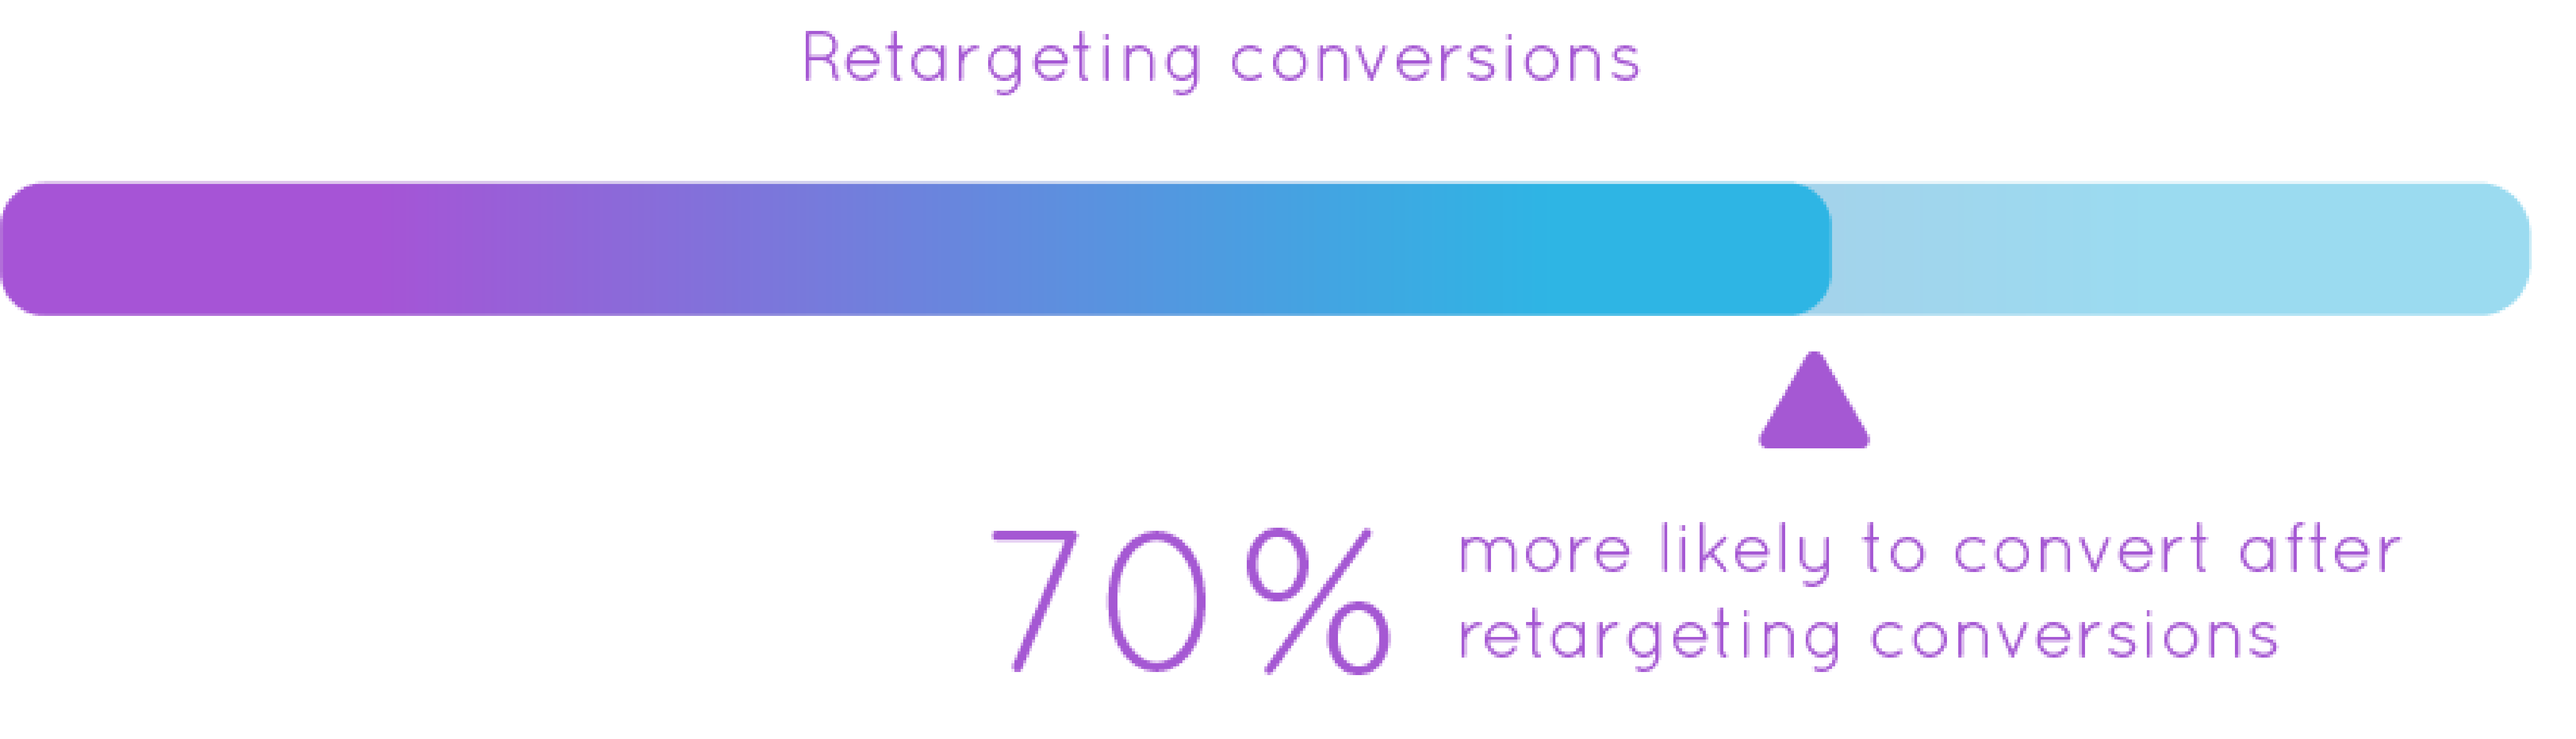 Infographic: Customers who see retargeting ads are 70% more likely to convert 